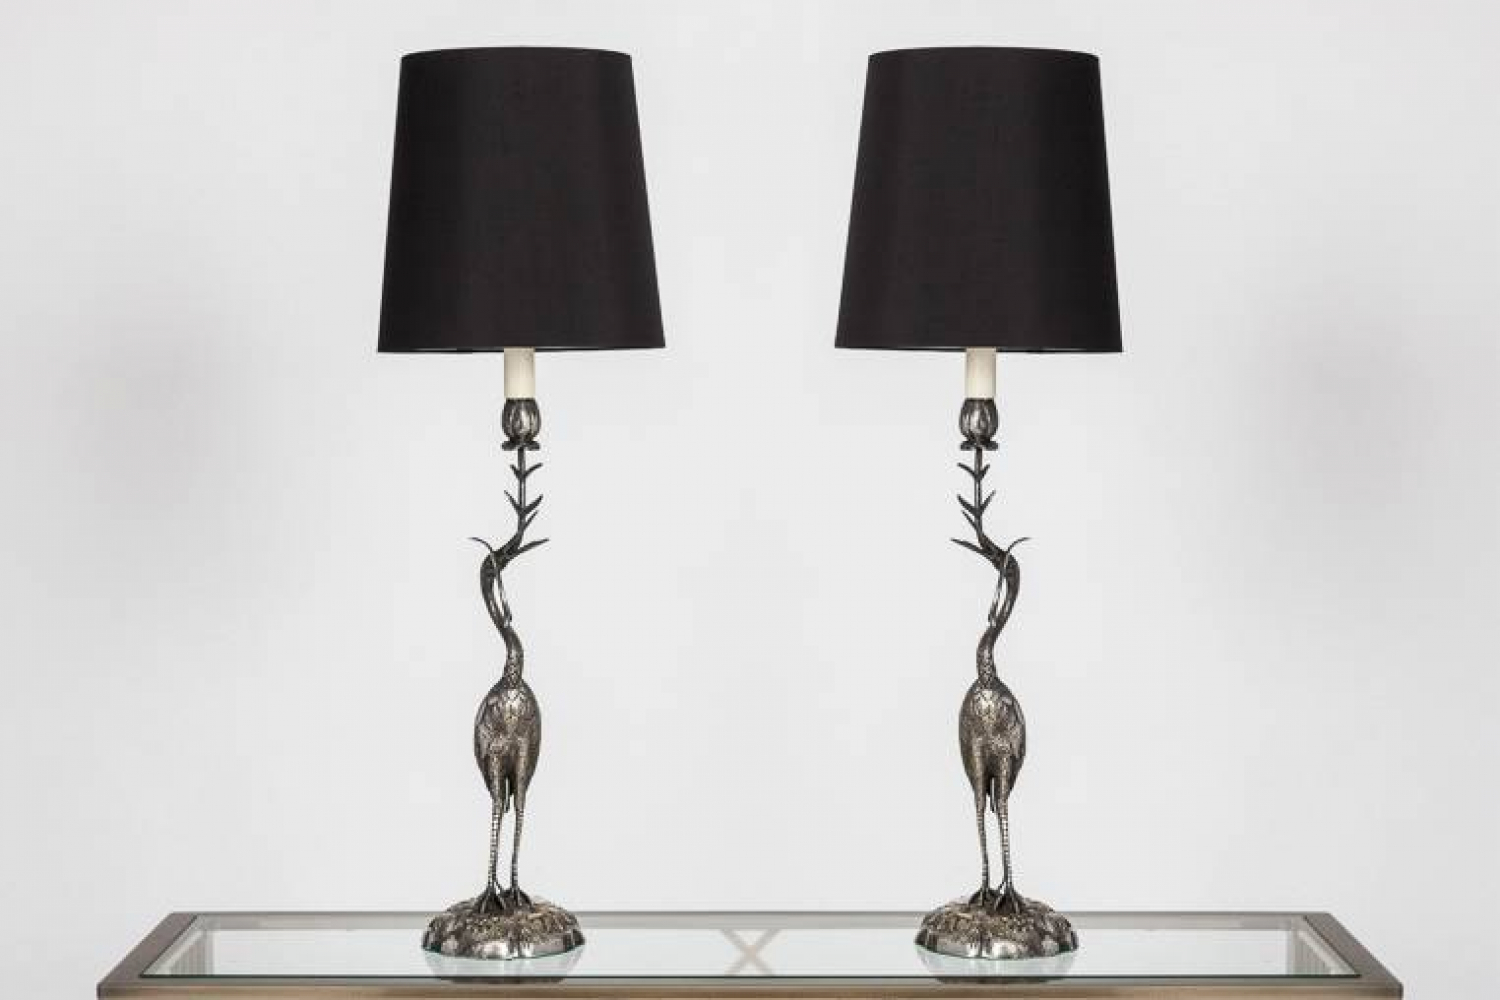 Pair of Stork Table Lamps